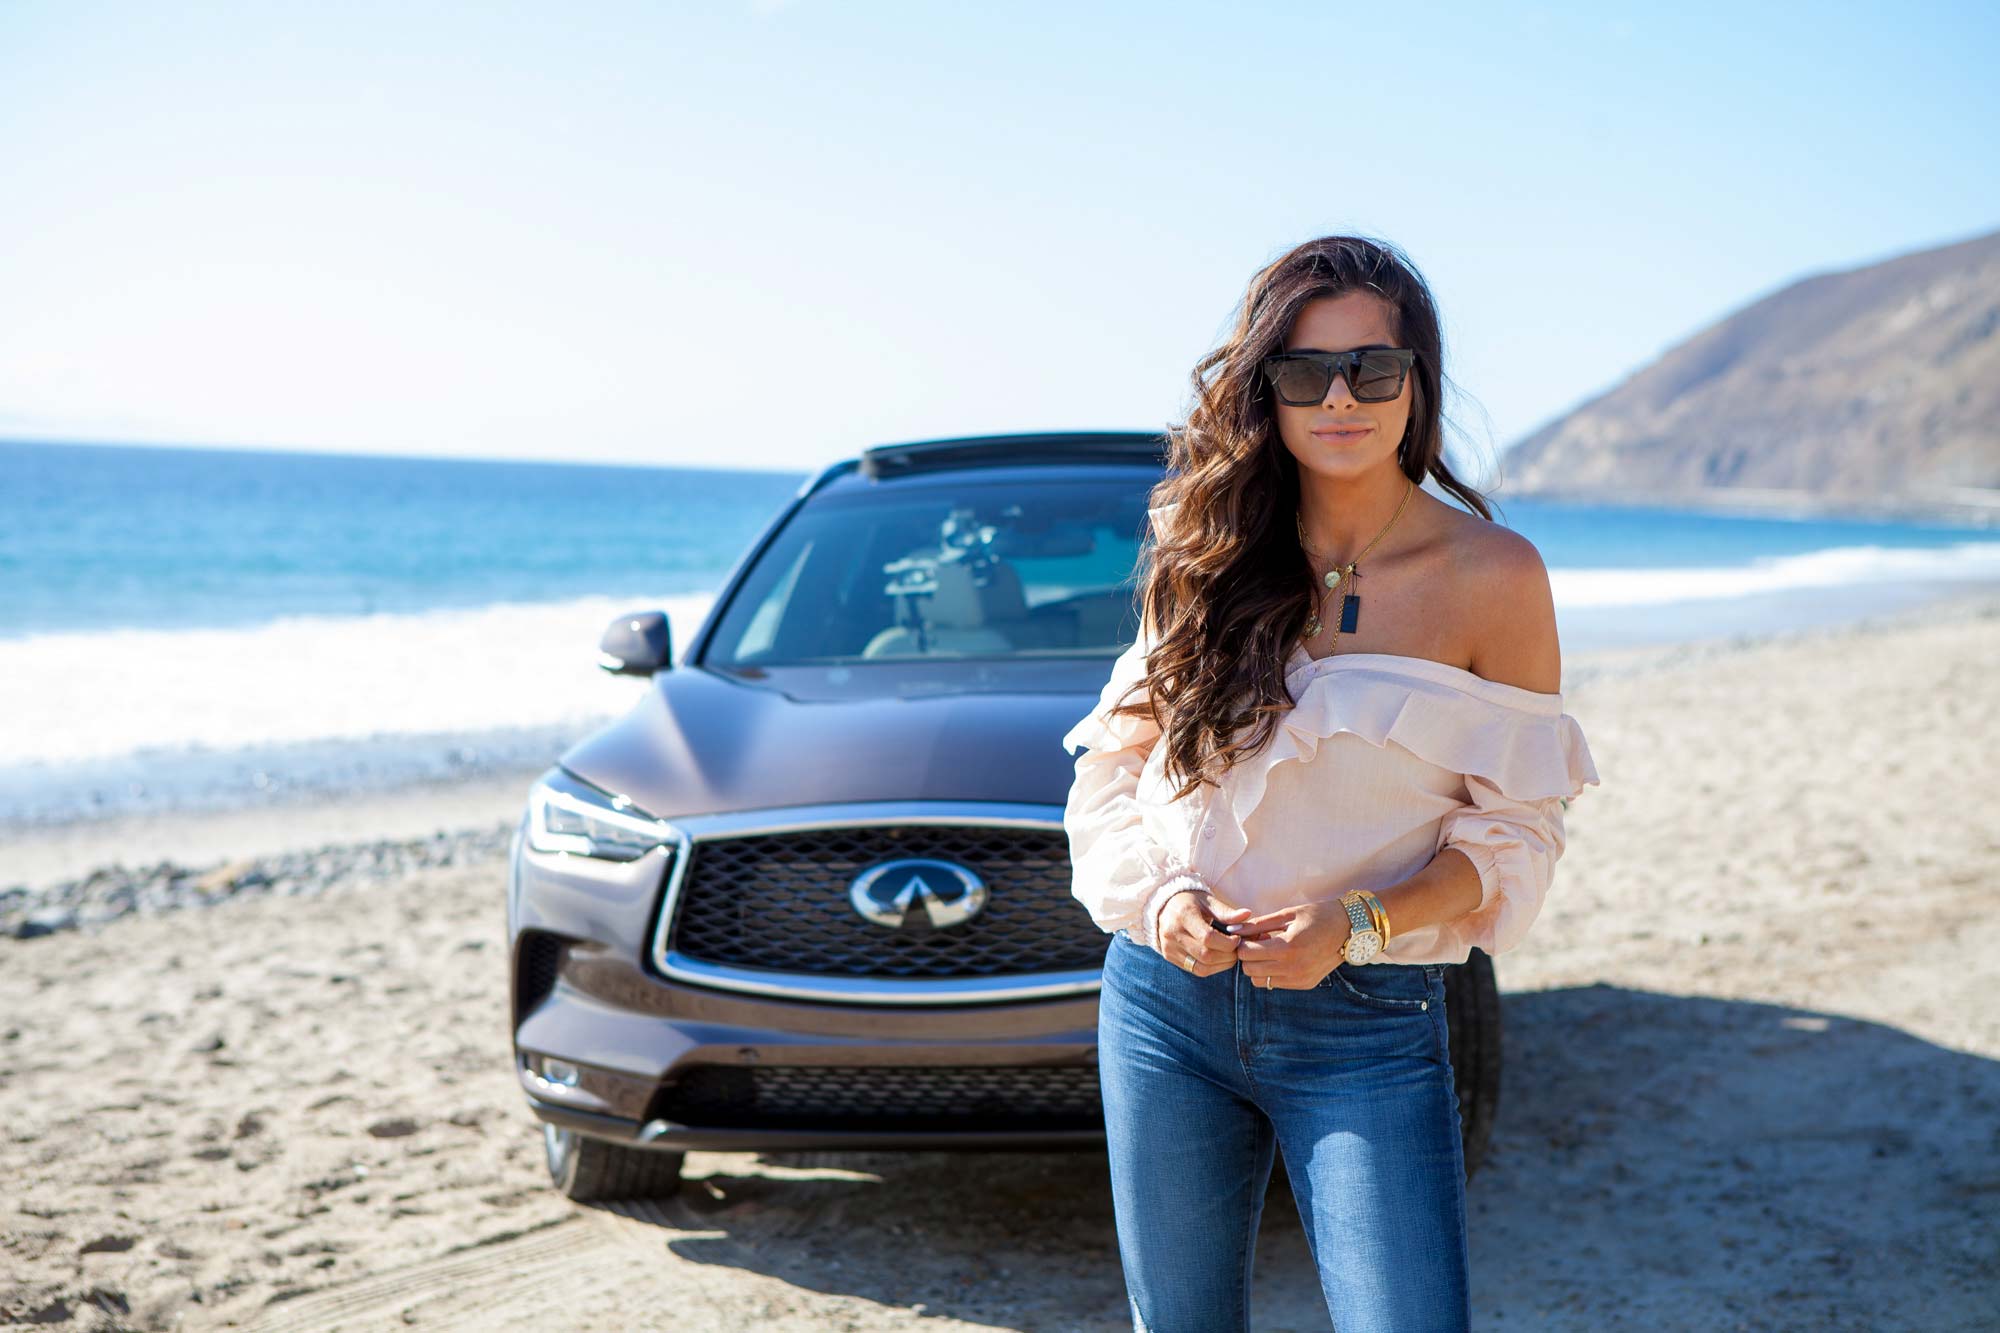 Emily Ann Gemma(@emilyanngemma) - Fashion Photography of social media influencer driving and standing in front of new Infiniti QX50 car